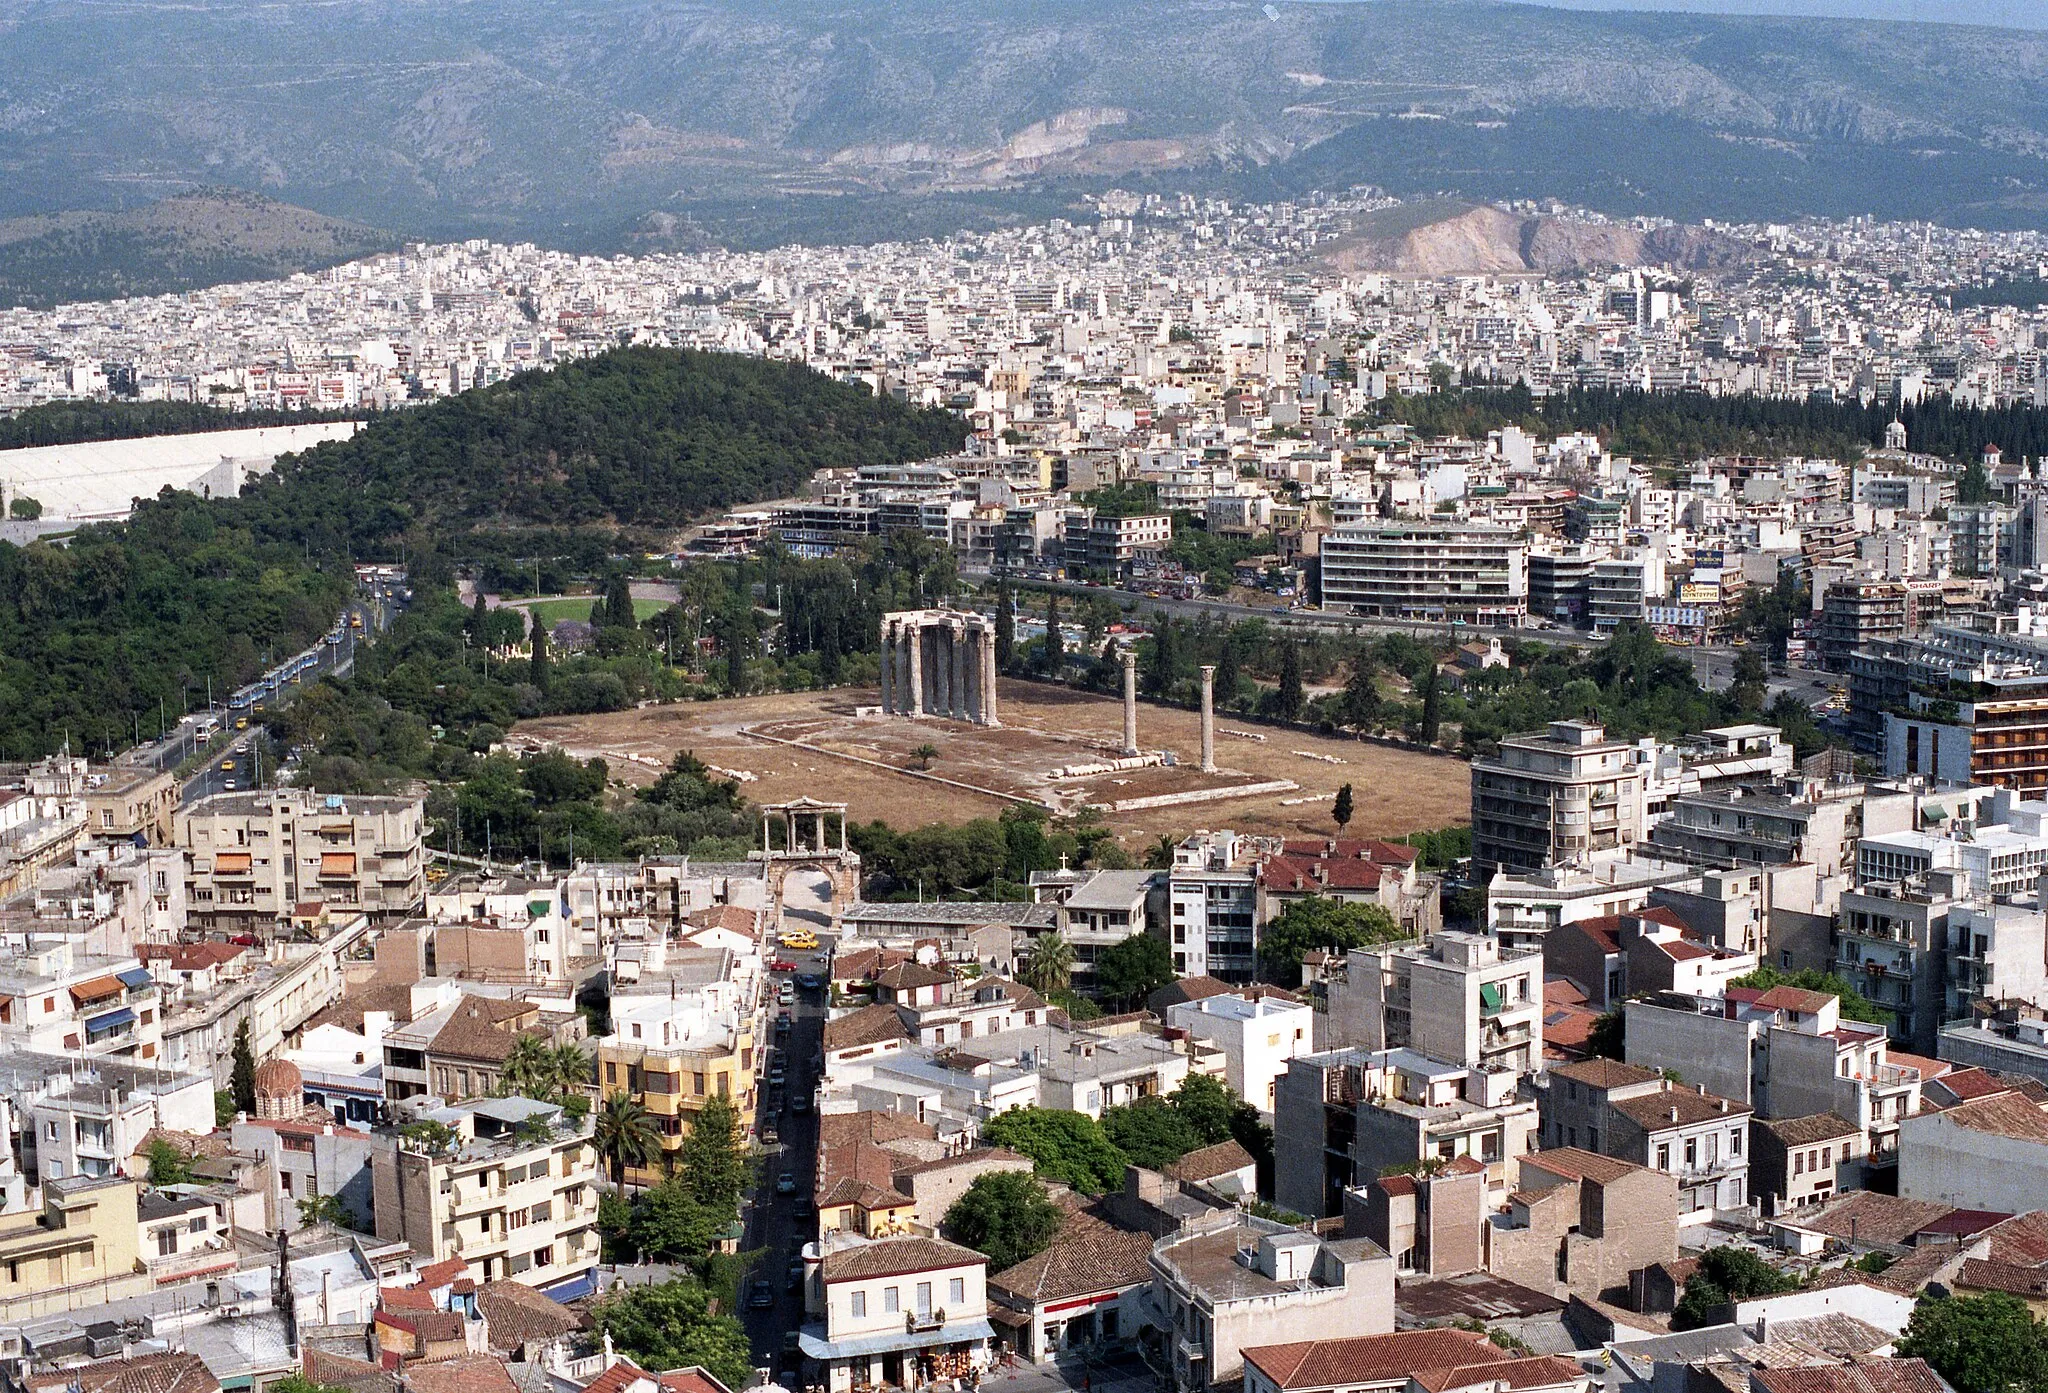 Photo showing: A photo of the Temple of Olympian Zeus, in Athens, Greece from a high vantage point, showing the ruins amidst the city.  Taken by a family member on a trip in the '80s.